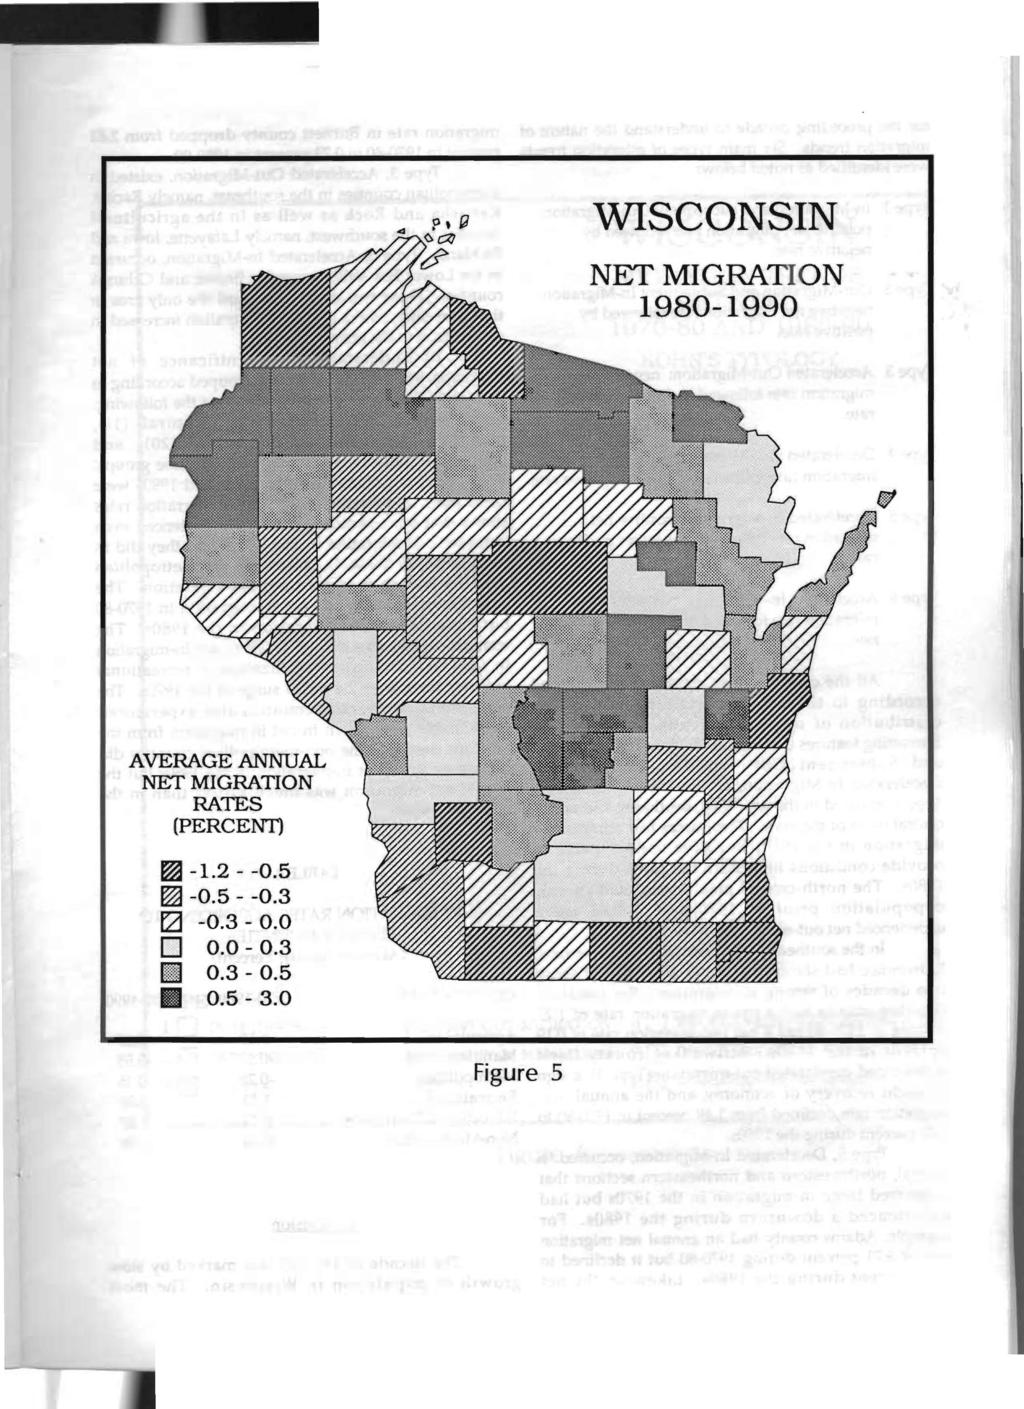 WISCONSIN NET MIGRATION 1980-1990 f$i AVERAGE ANNUAL NET MIGRATION RATES